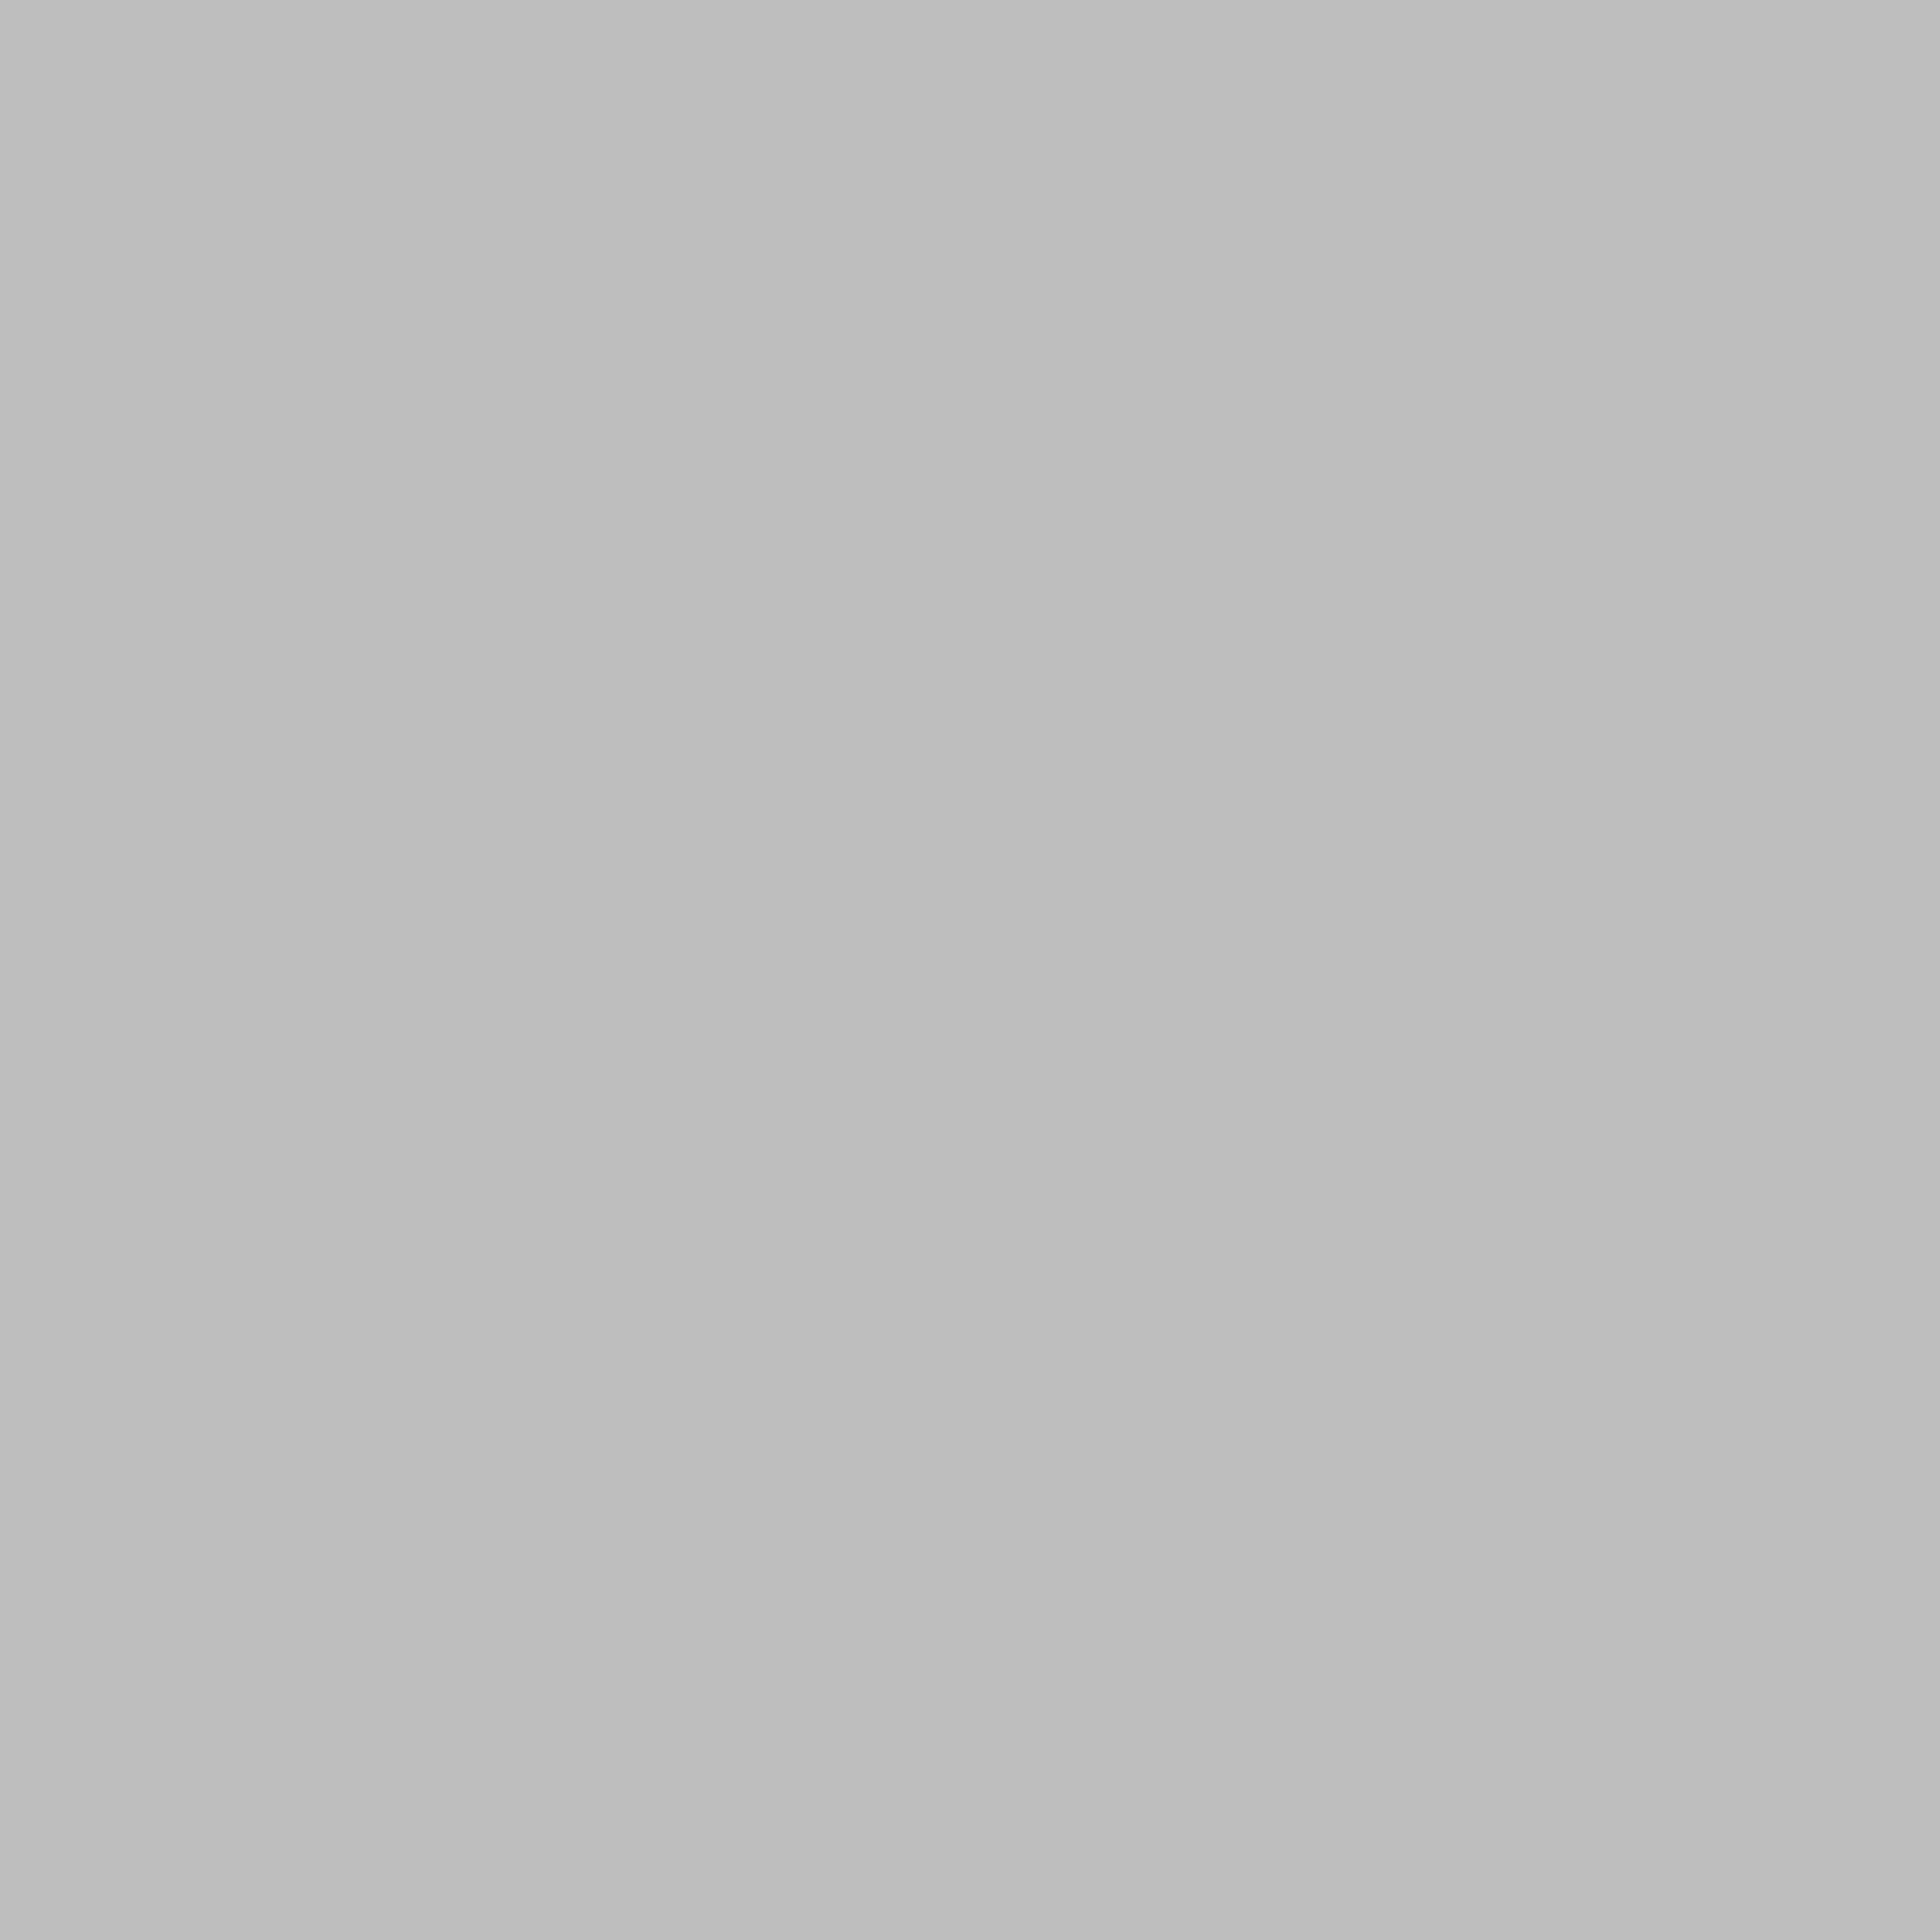 3600x3600 Gray X11 Gui Gray Solid Color Background